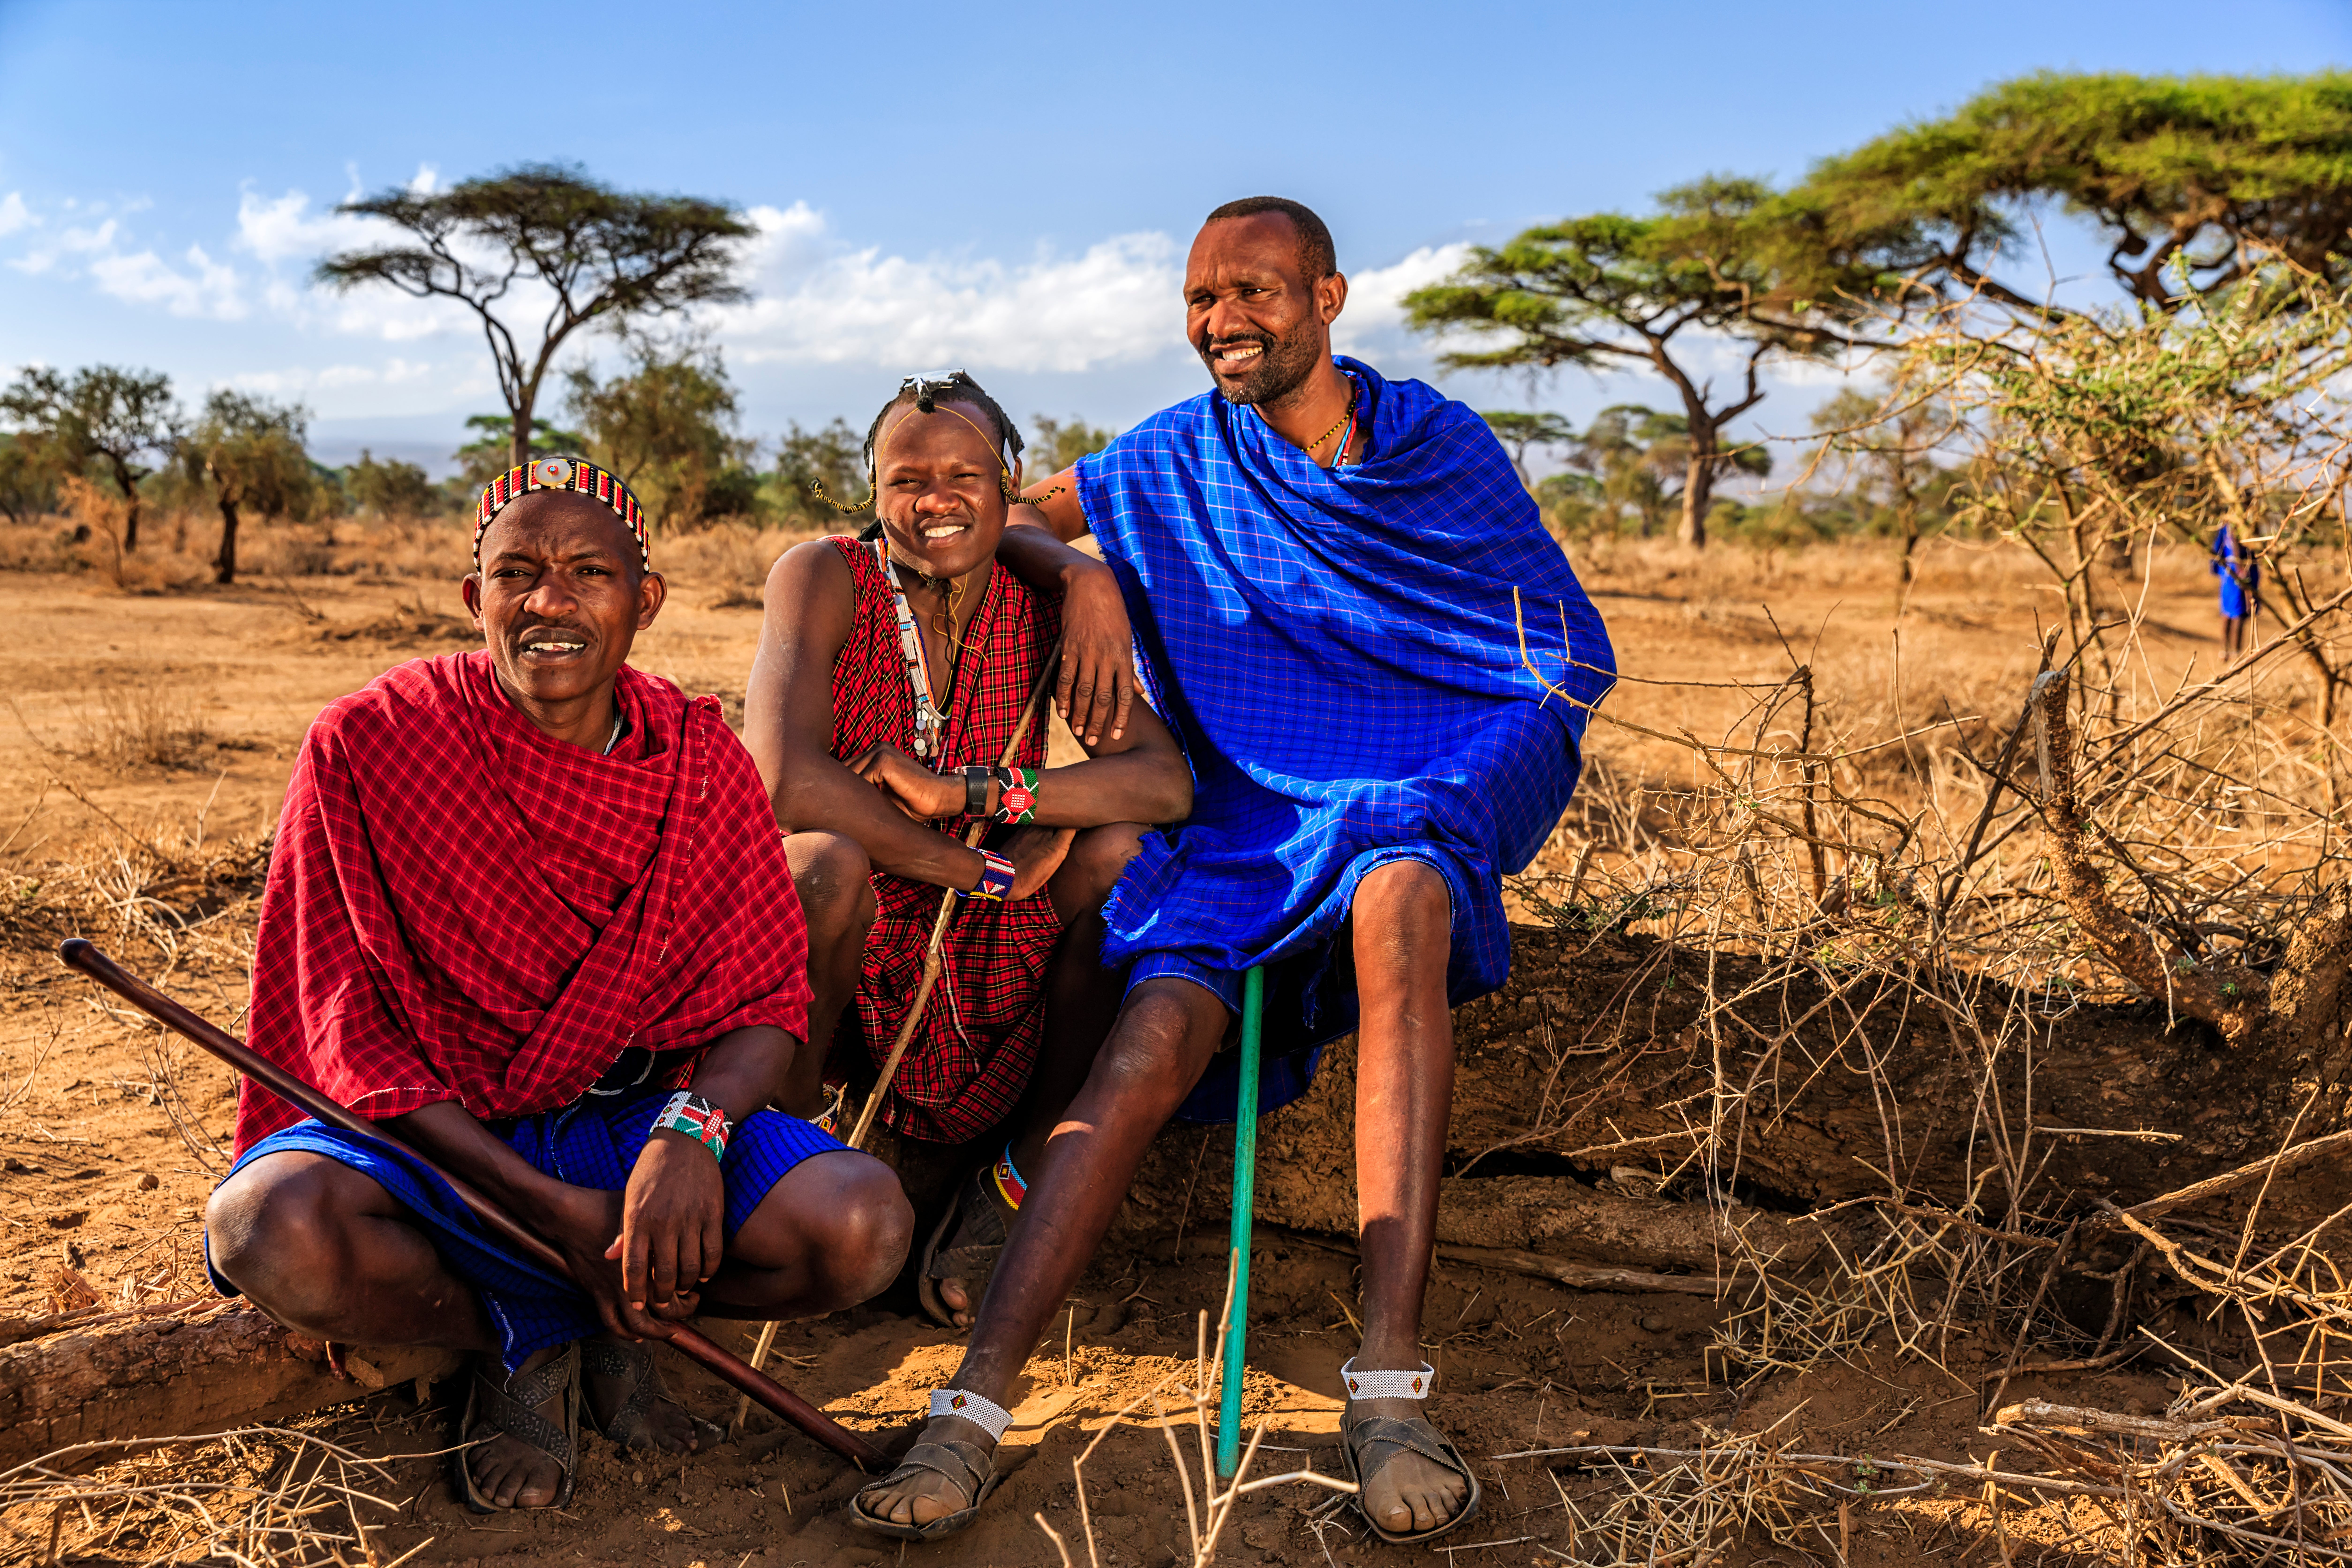 While the Massai warriors have become a familiar sight, there are in fact more than 40 other tribes that call Kenya home